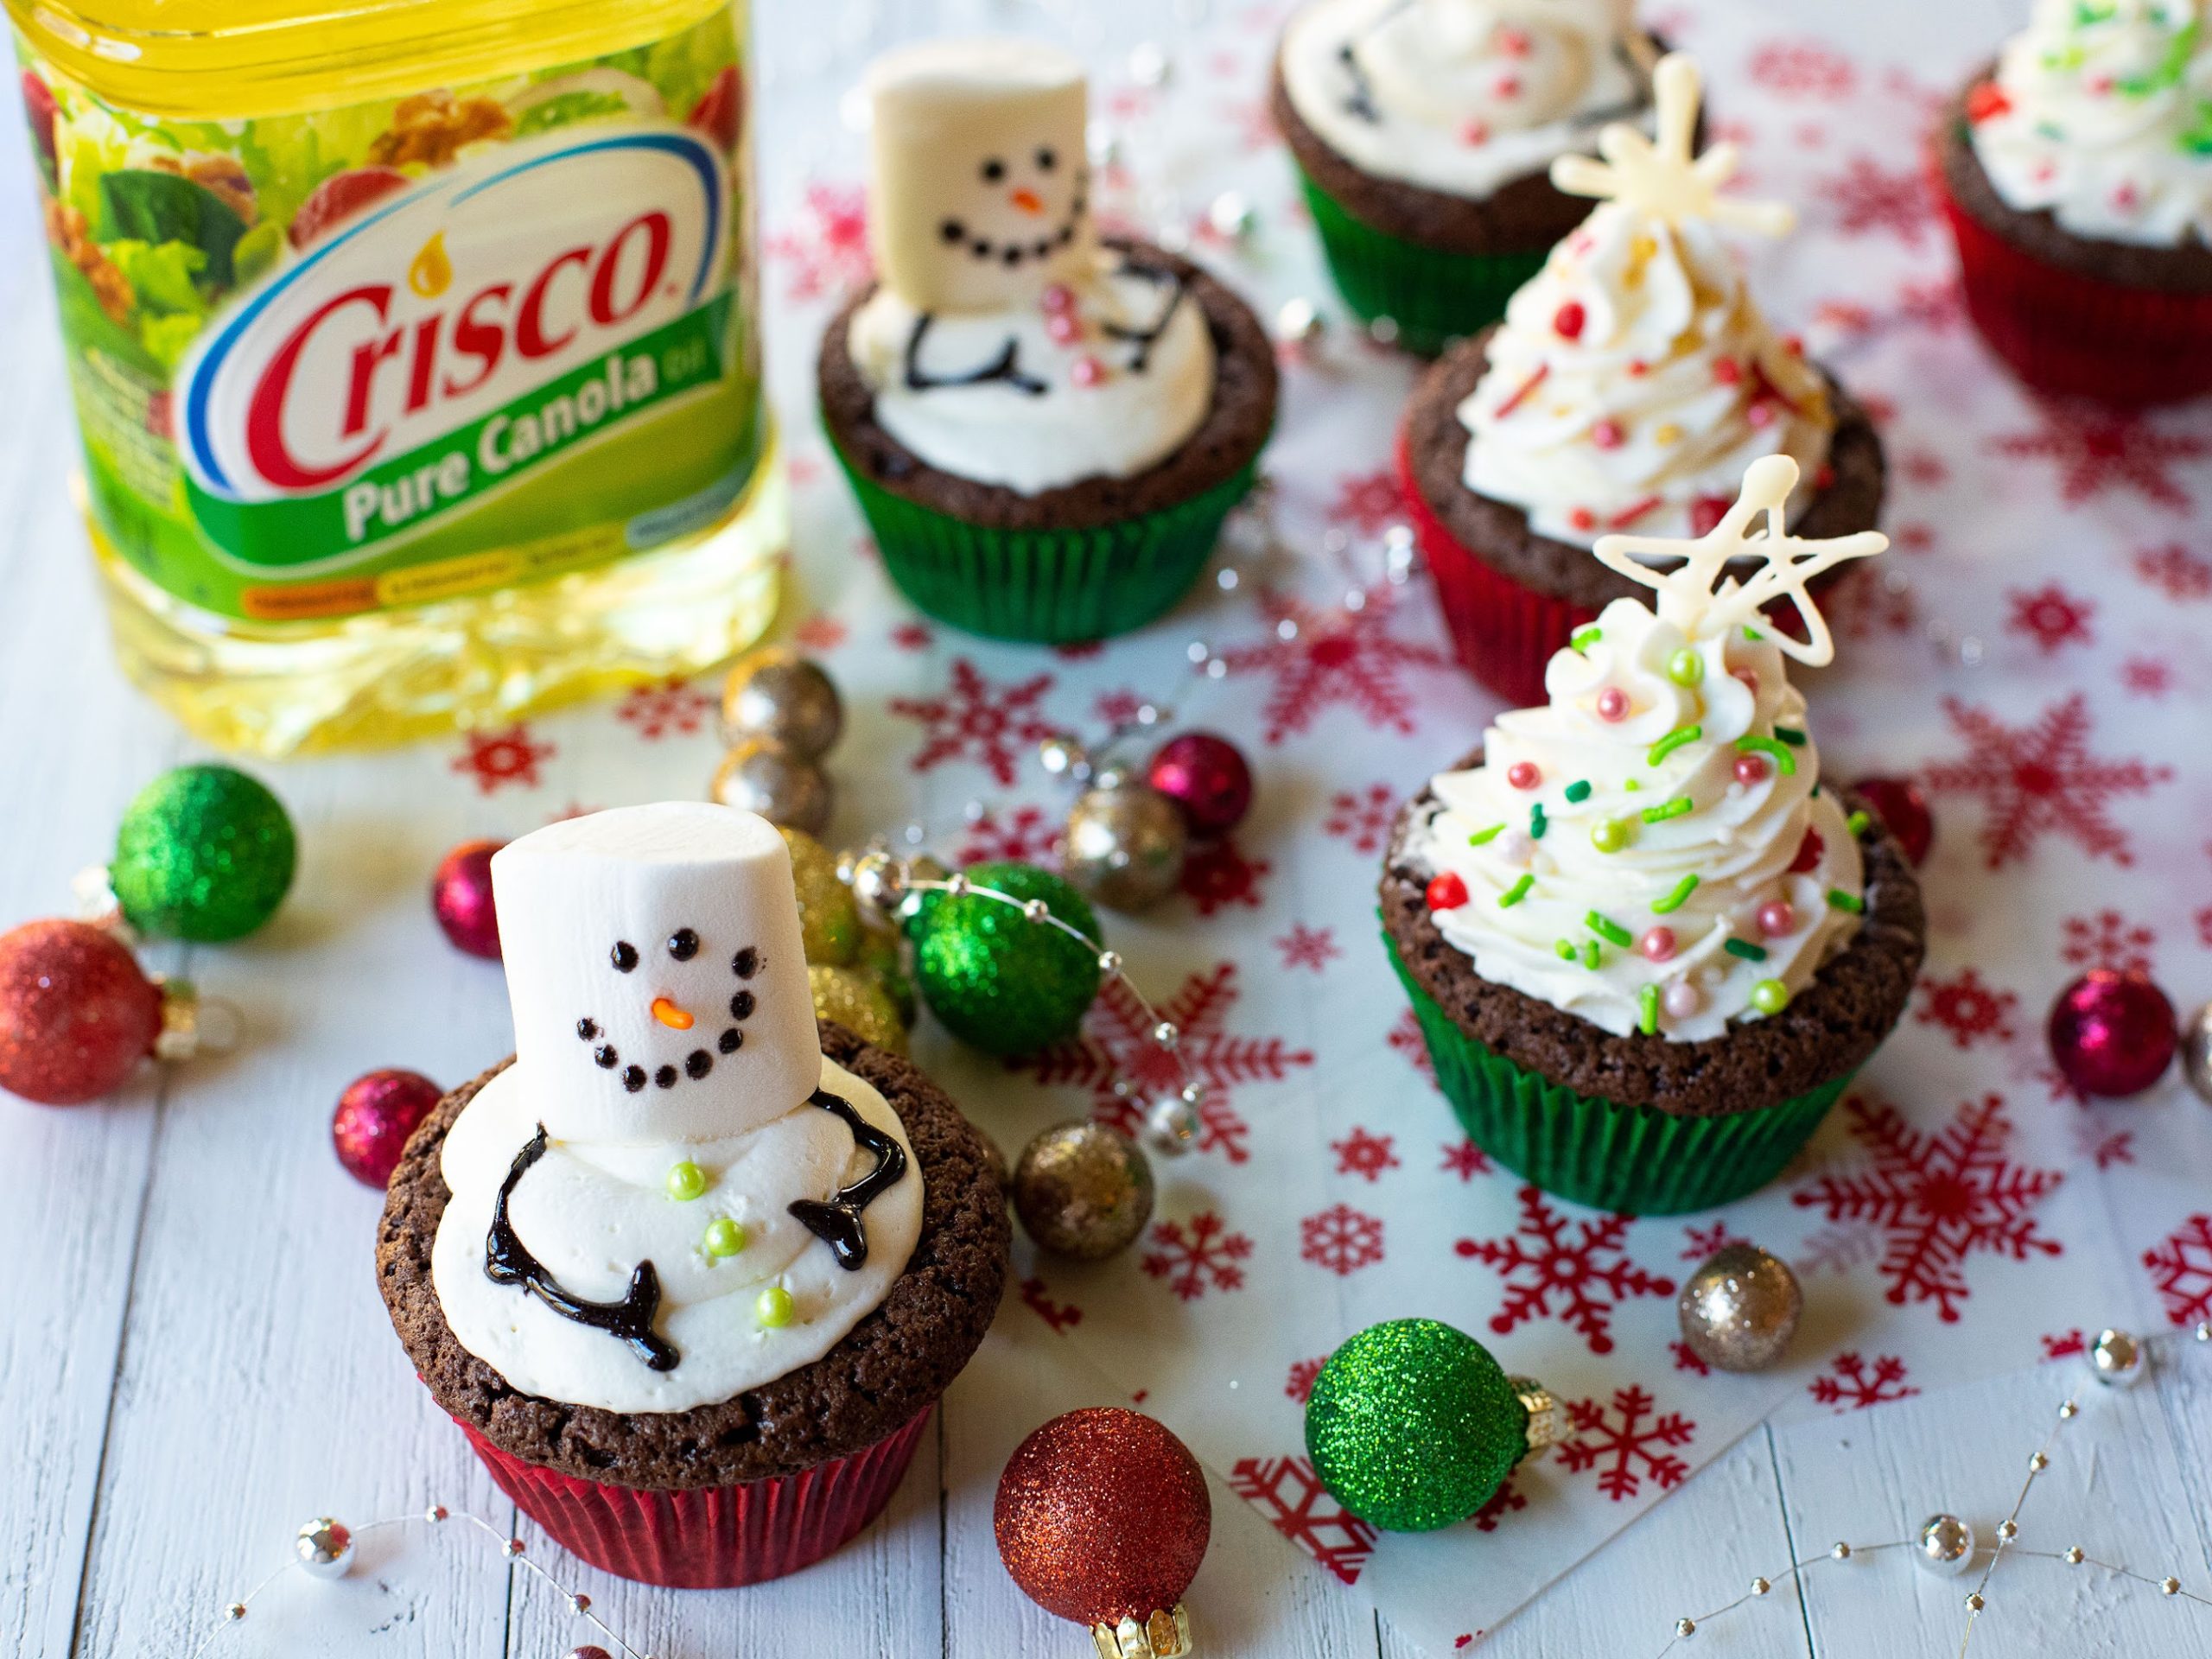 Grab Crisco Oil For All Of Your Holiday Baking Needs on I Heart Publix